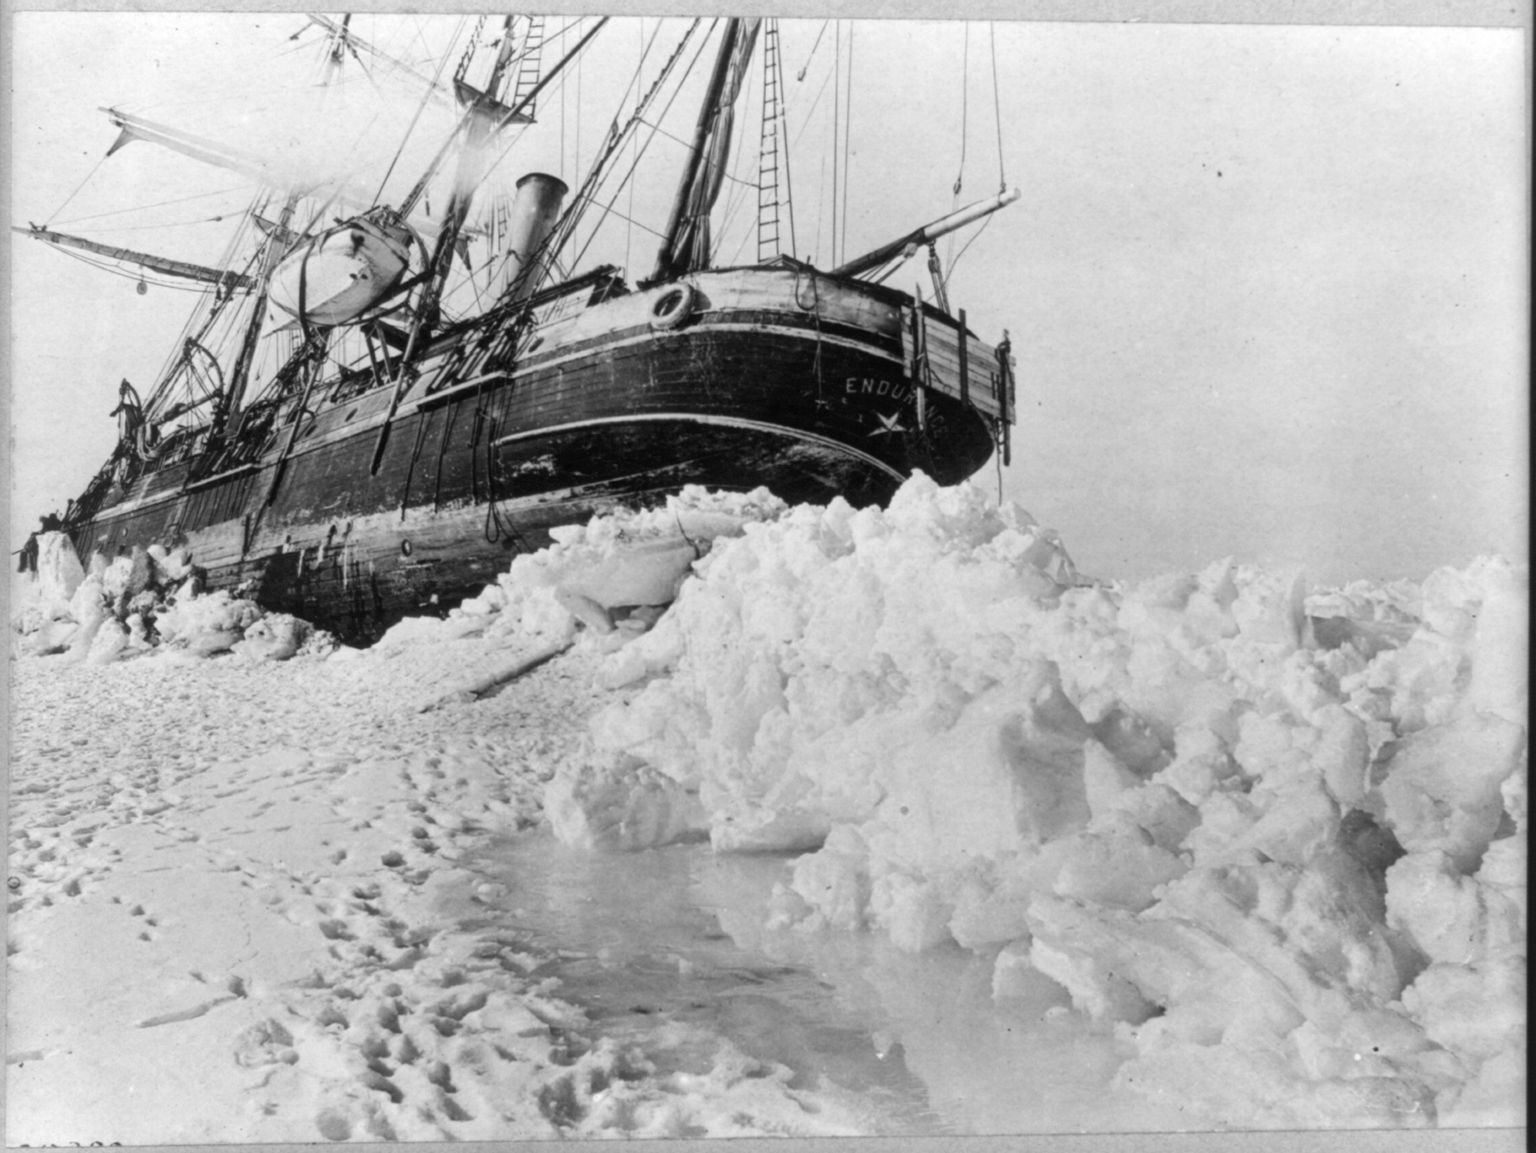 a black and white photograph of a large wooden ship stuck in antarctic ice